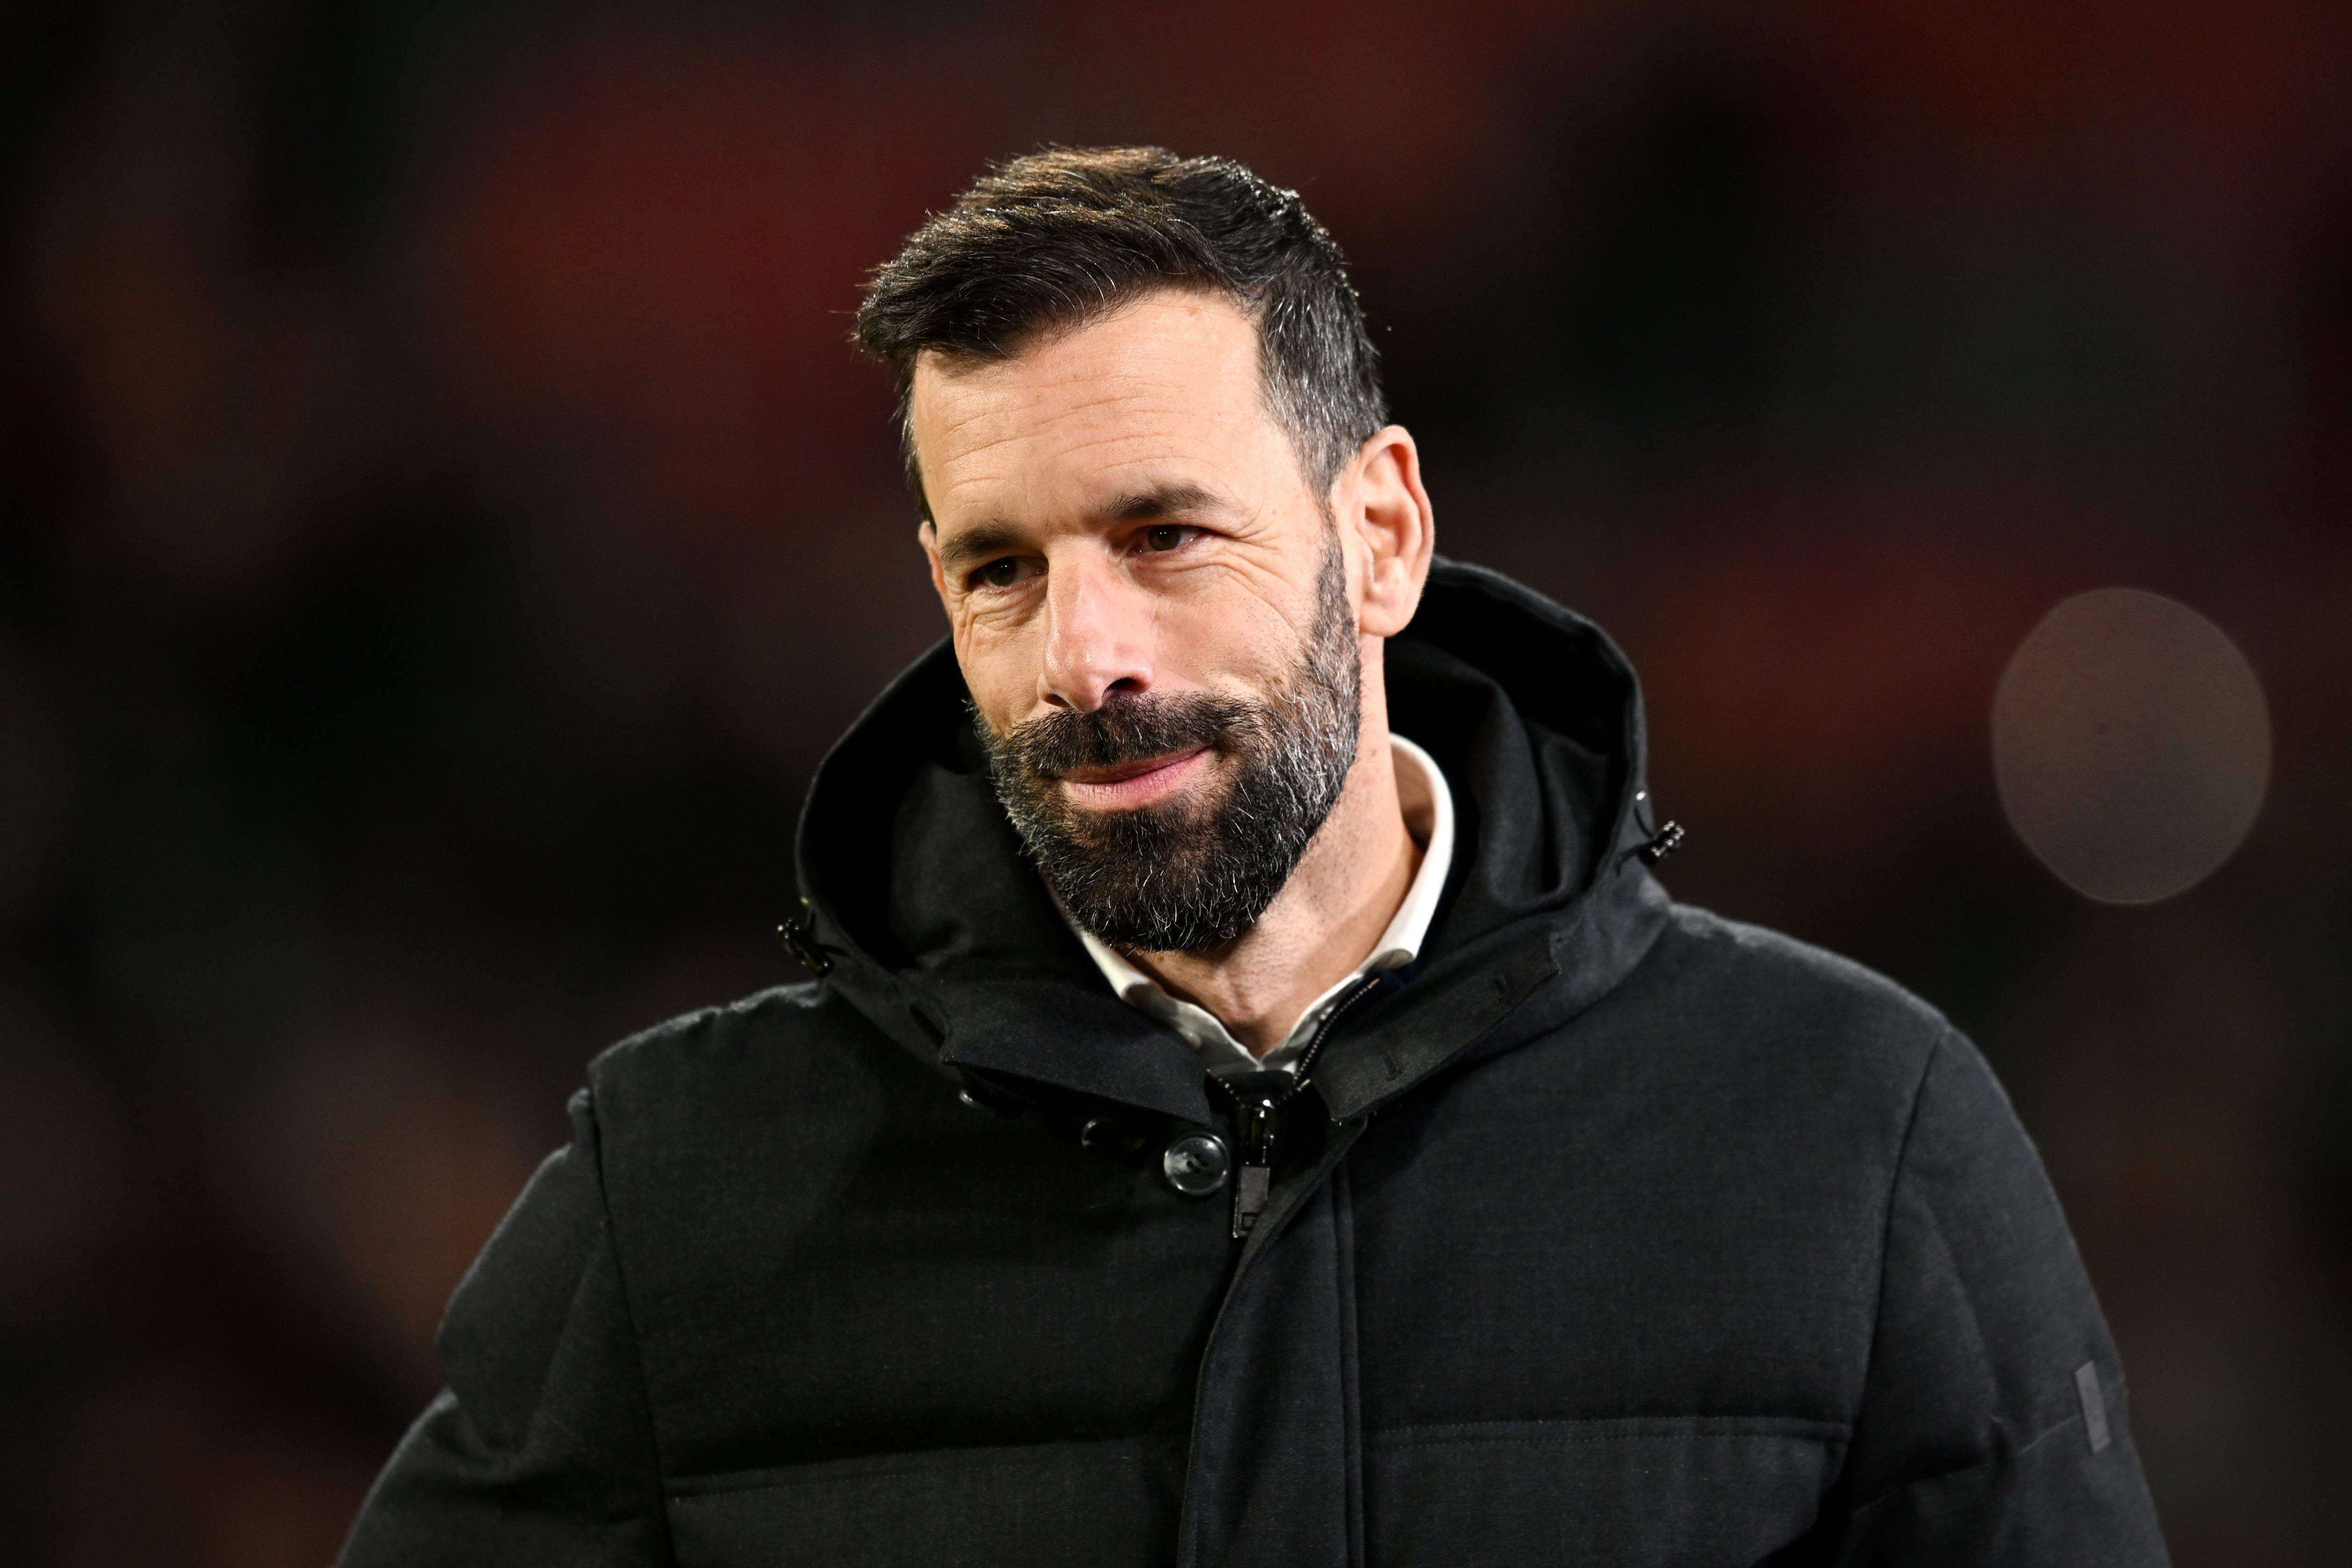 Manchester United want Ruud van Nistelrooy to join Erik Ten Hag’s coaching team